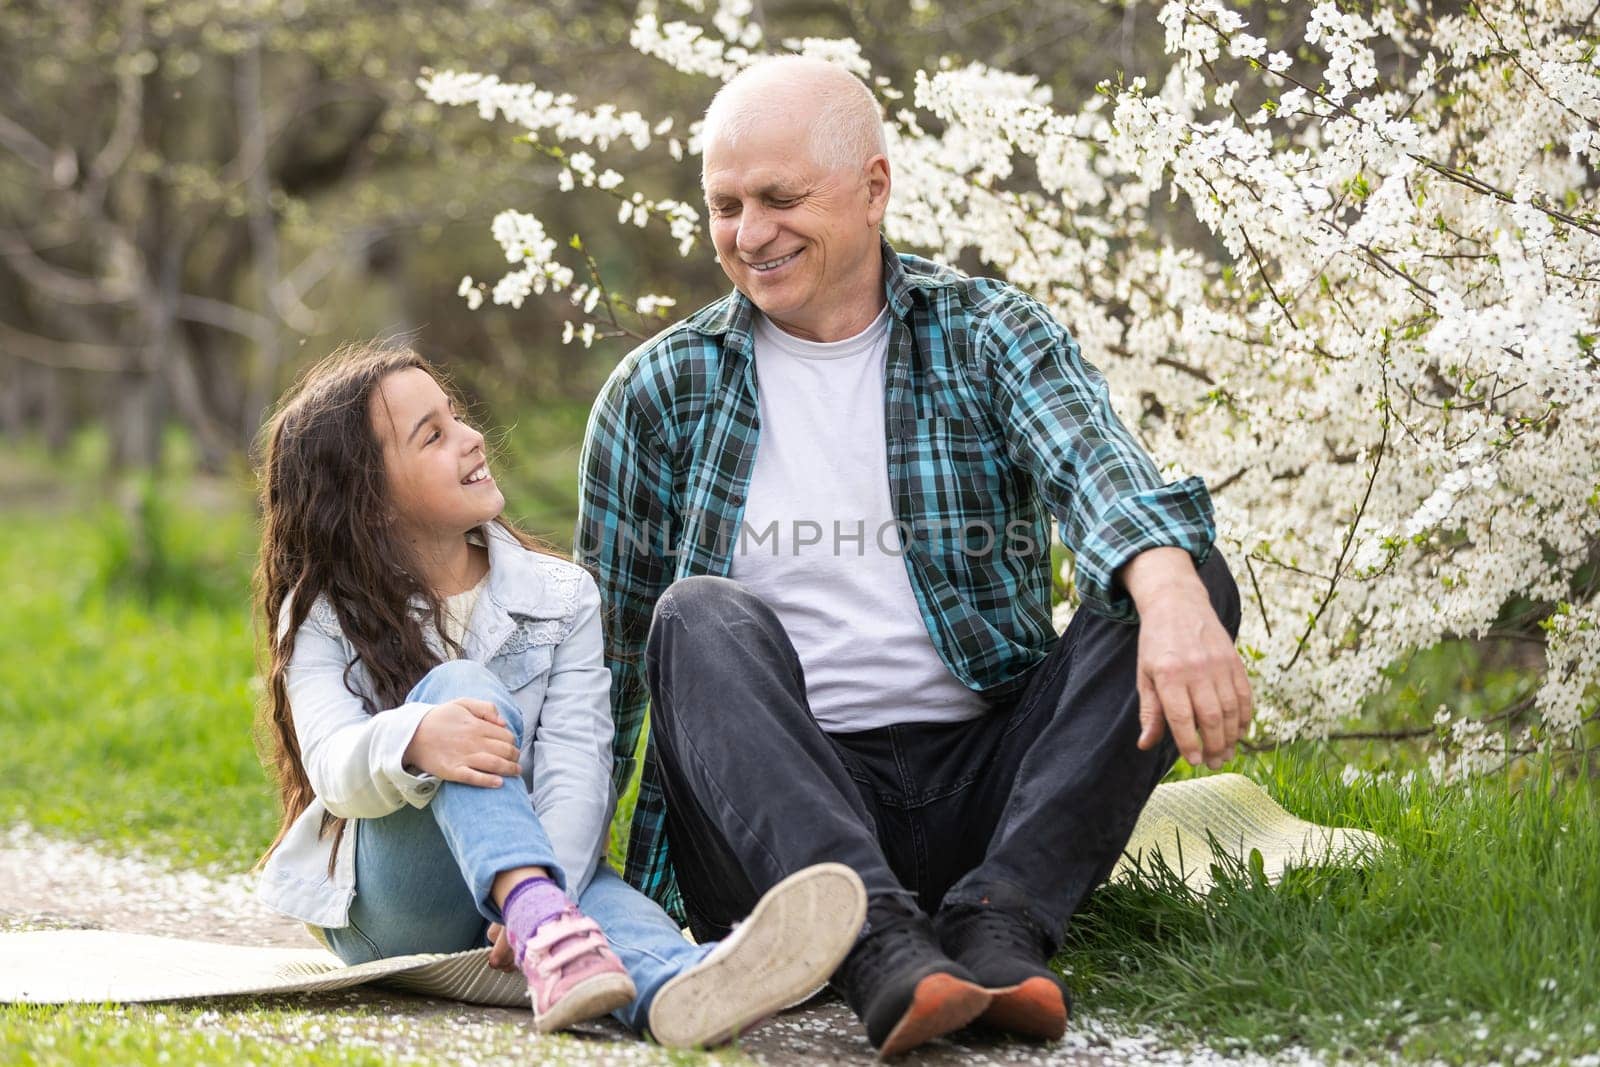 Smiling child hugging her happy grandfather - outdoor in nature. by Andelov13